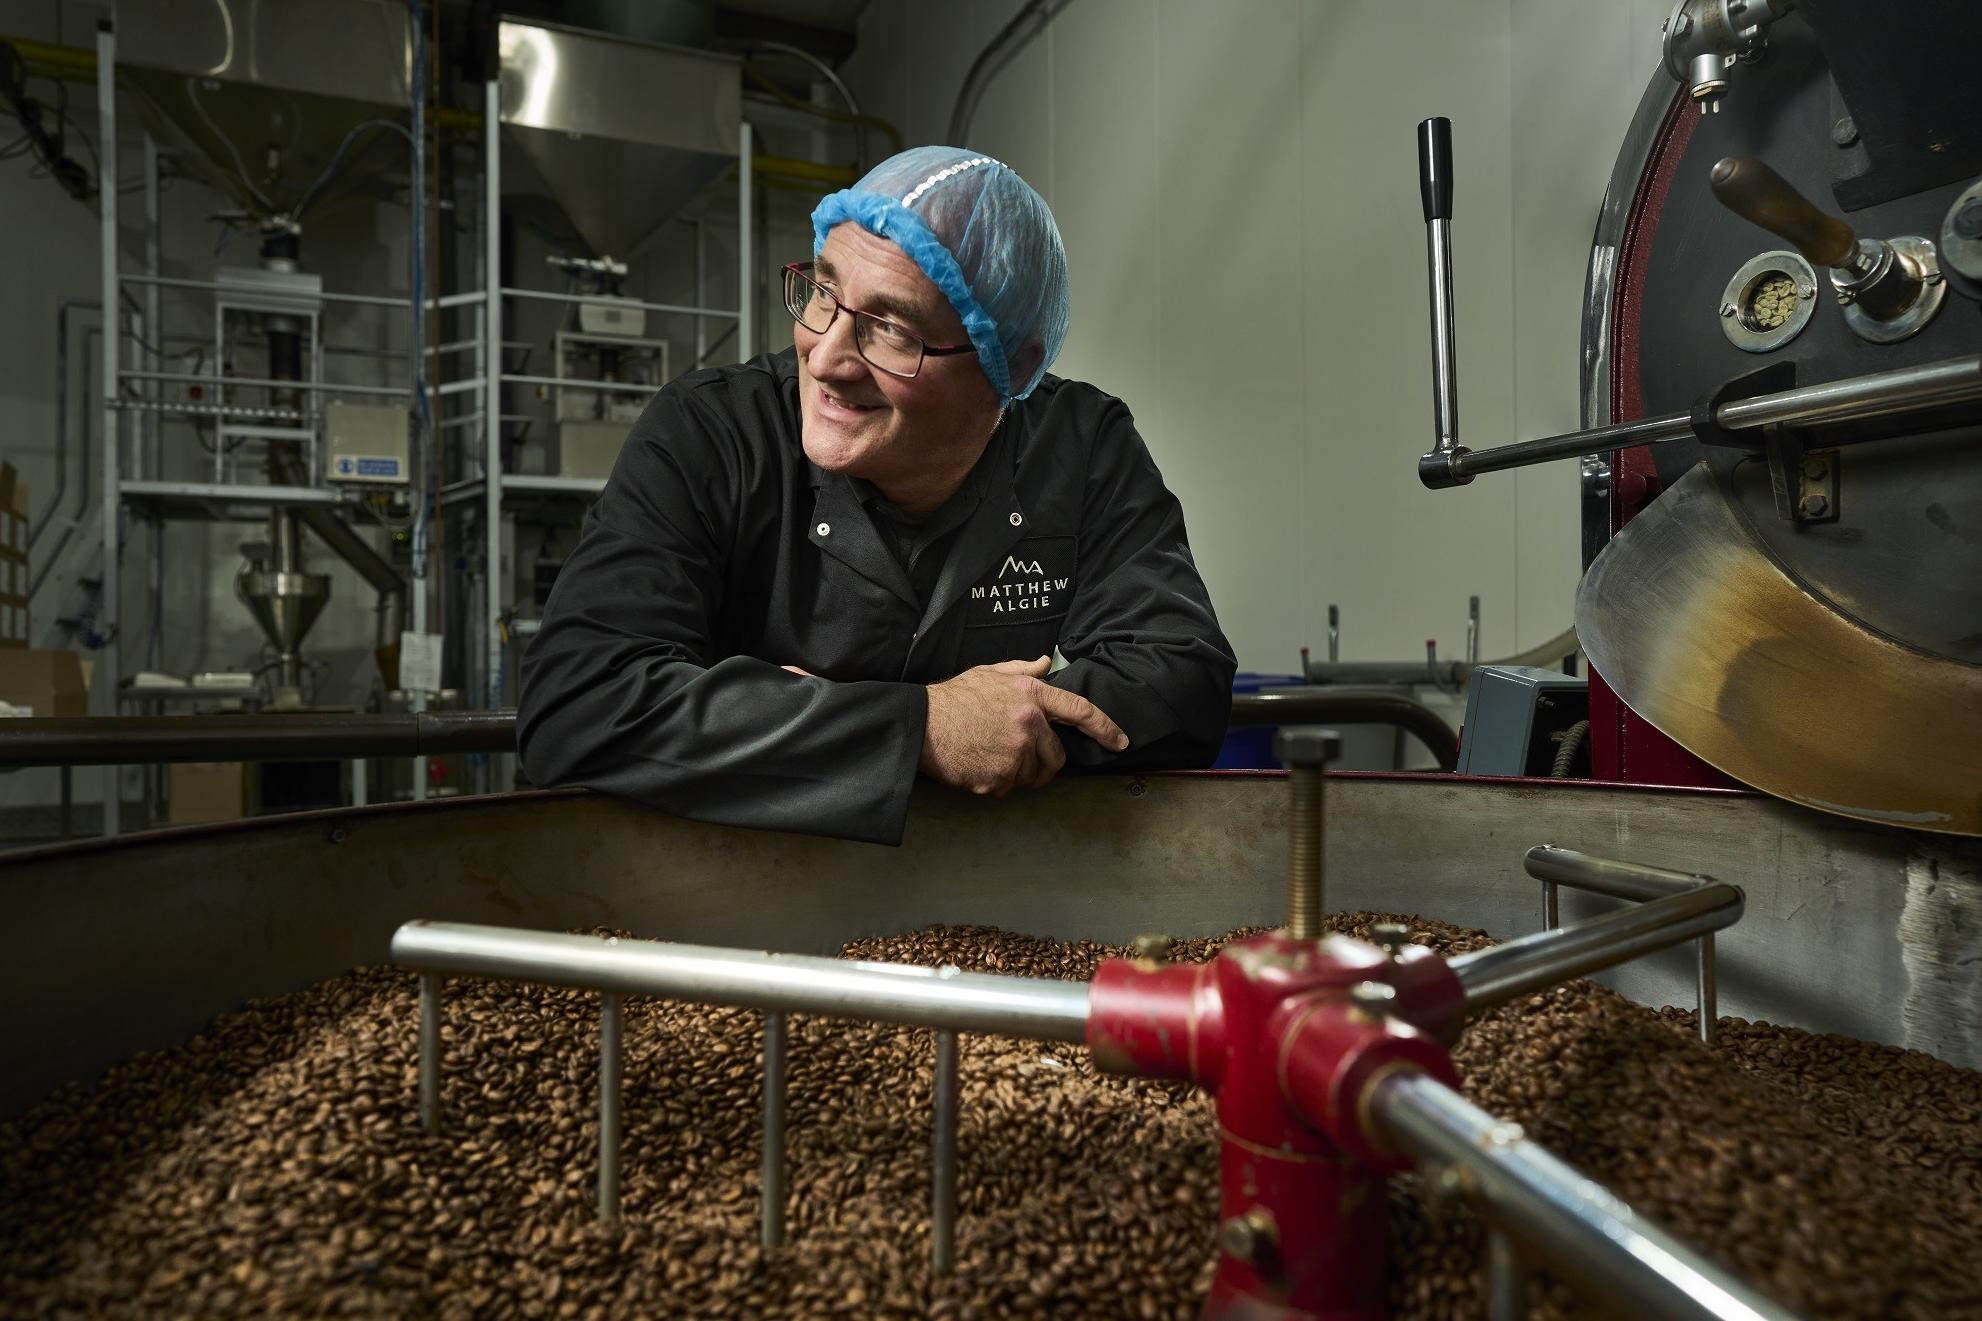 historic glasgow coffee roaster founded 160 years ago to ramp up production after turning ‘next chapter’